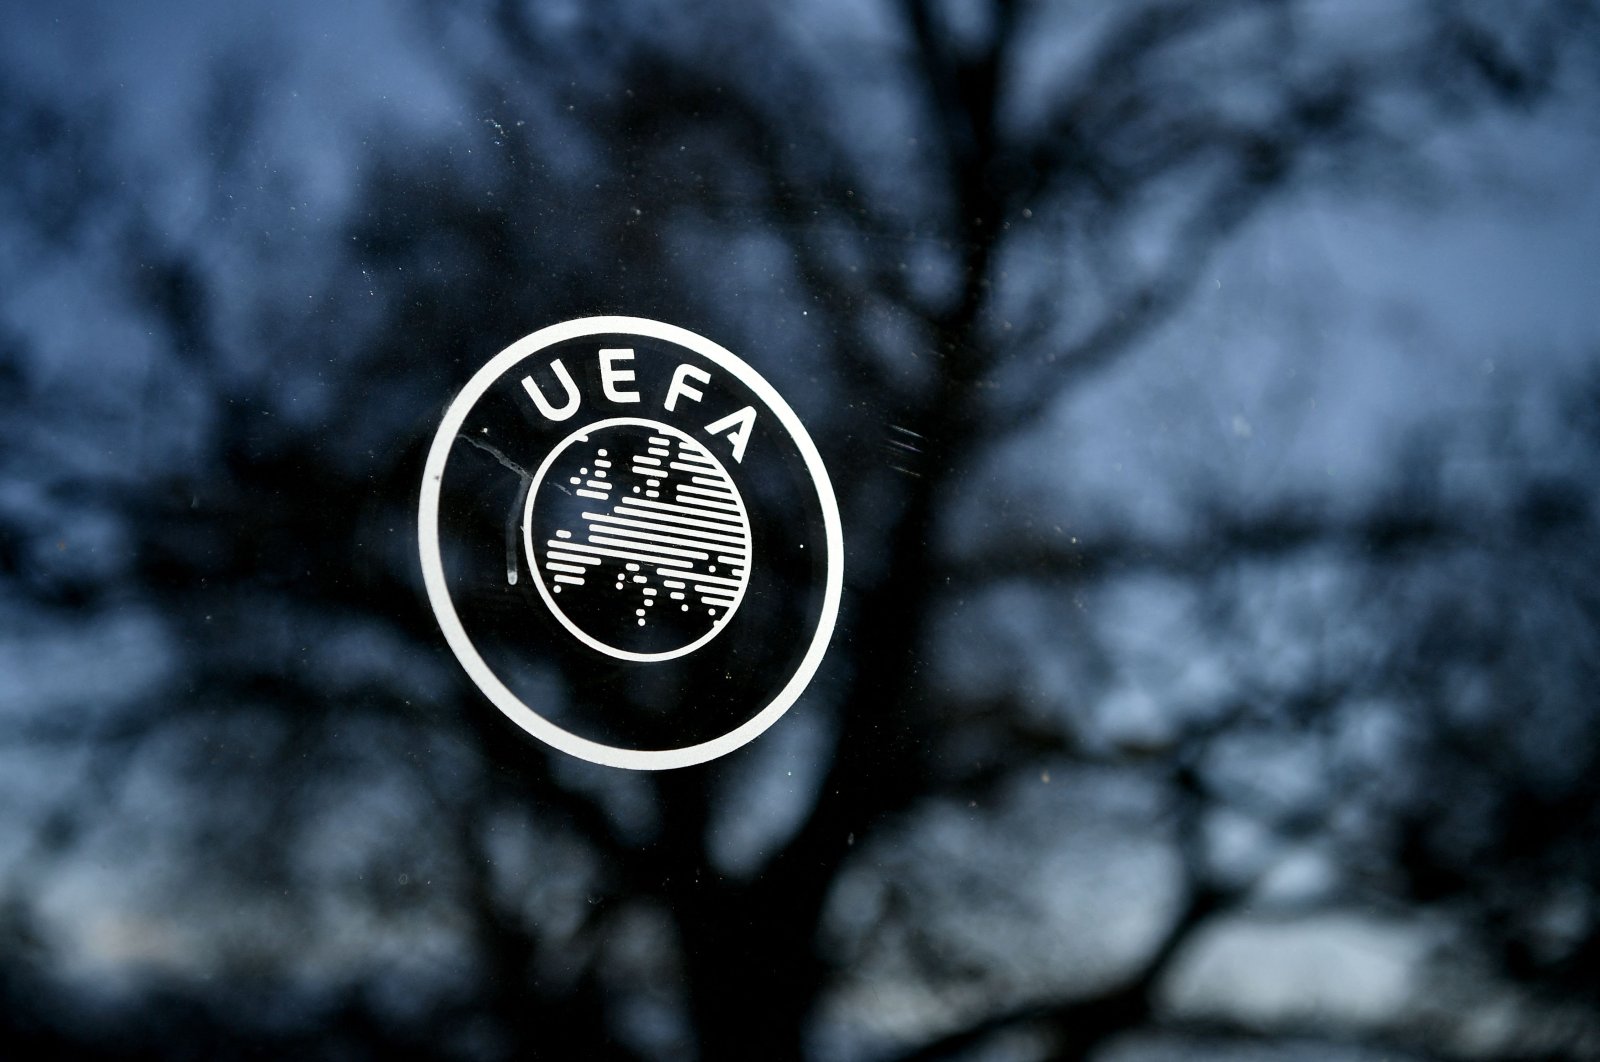 The UEFA logo is seen at its headquarters in Nyon, Switzerland, April 18, 2021. (AFP Photo)